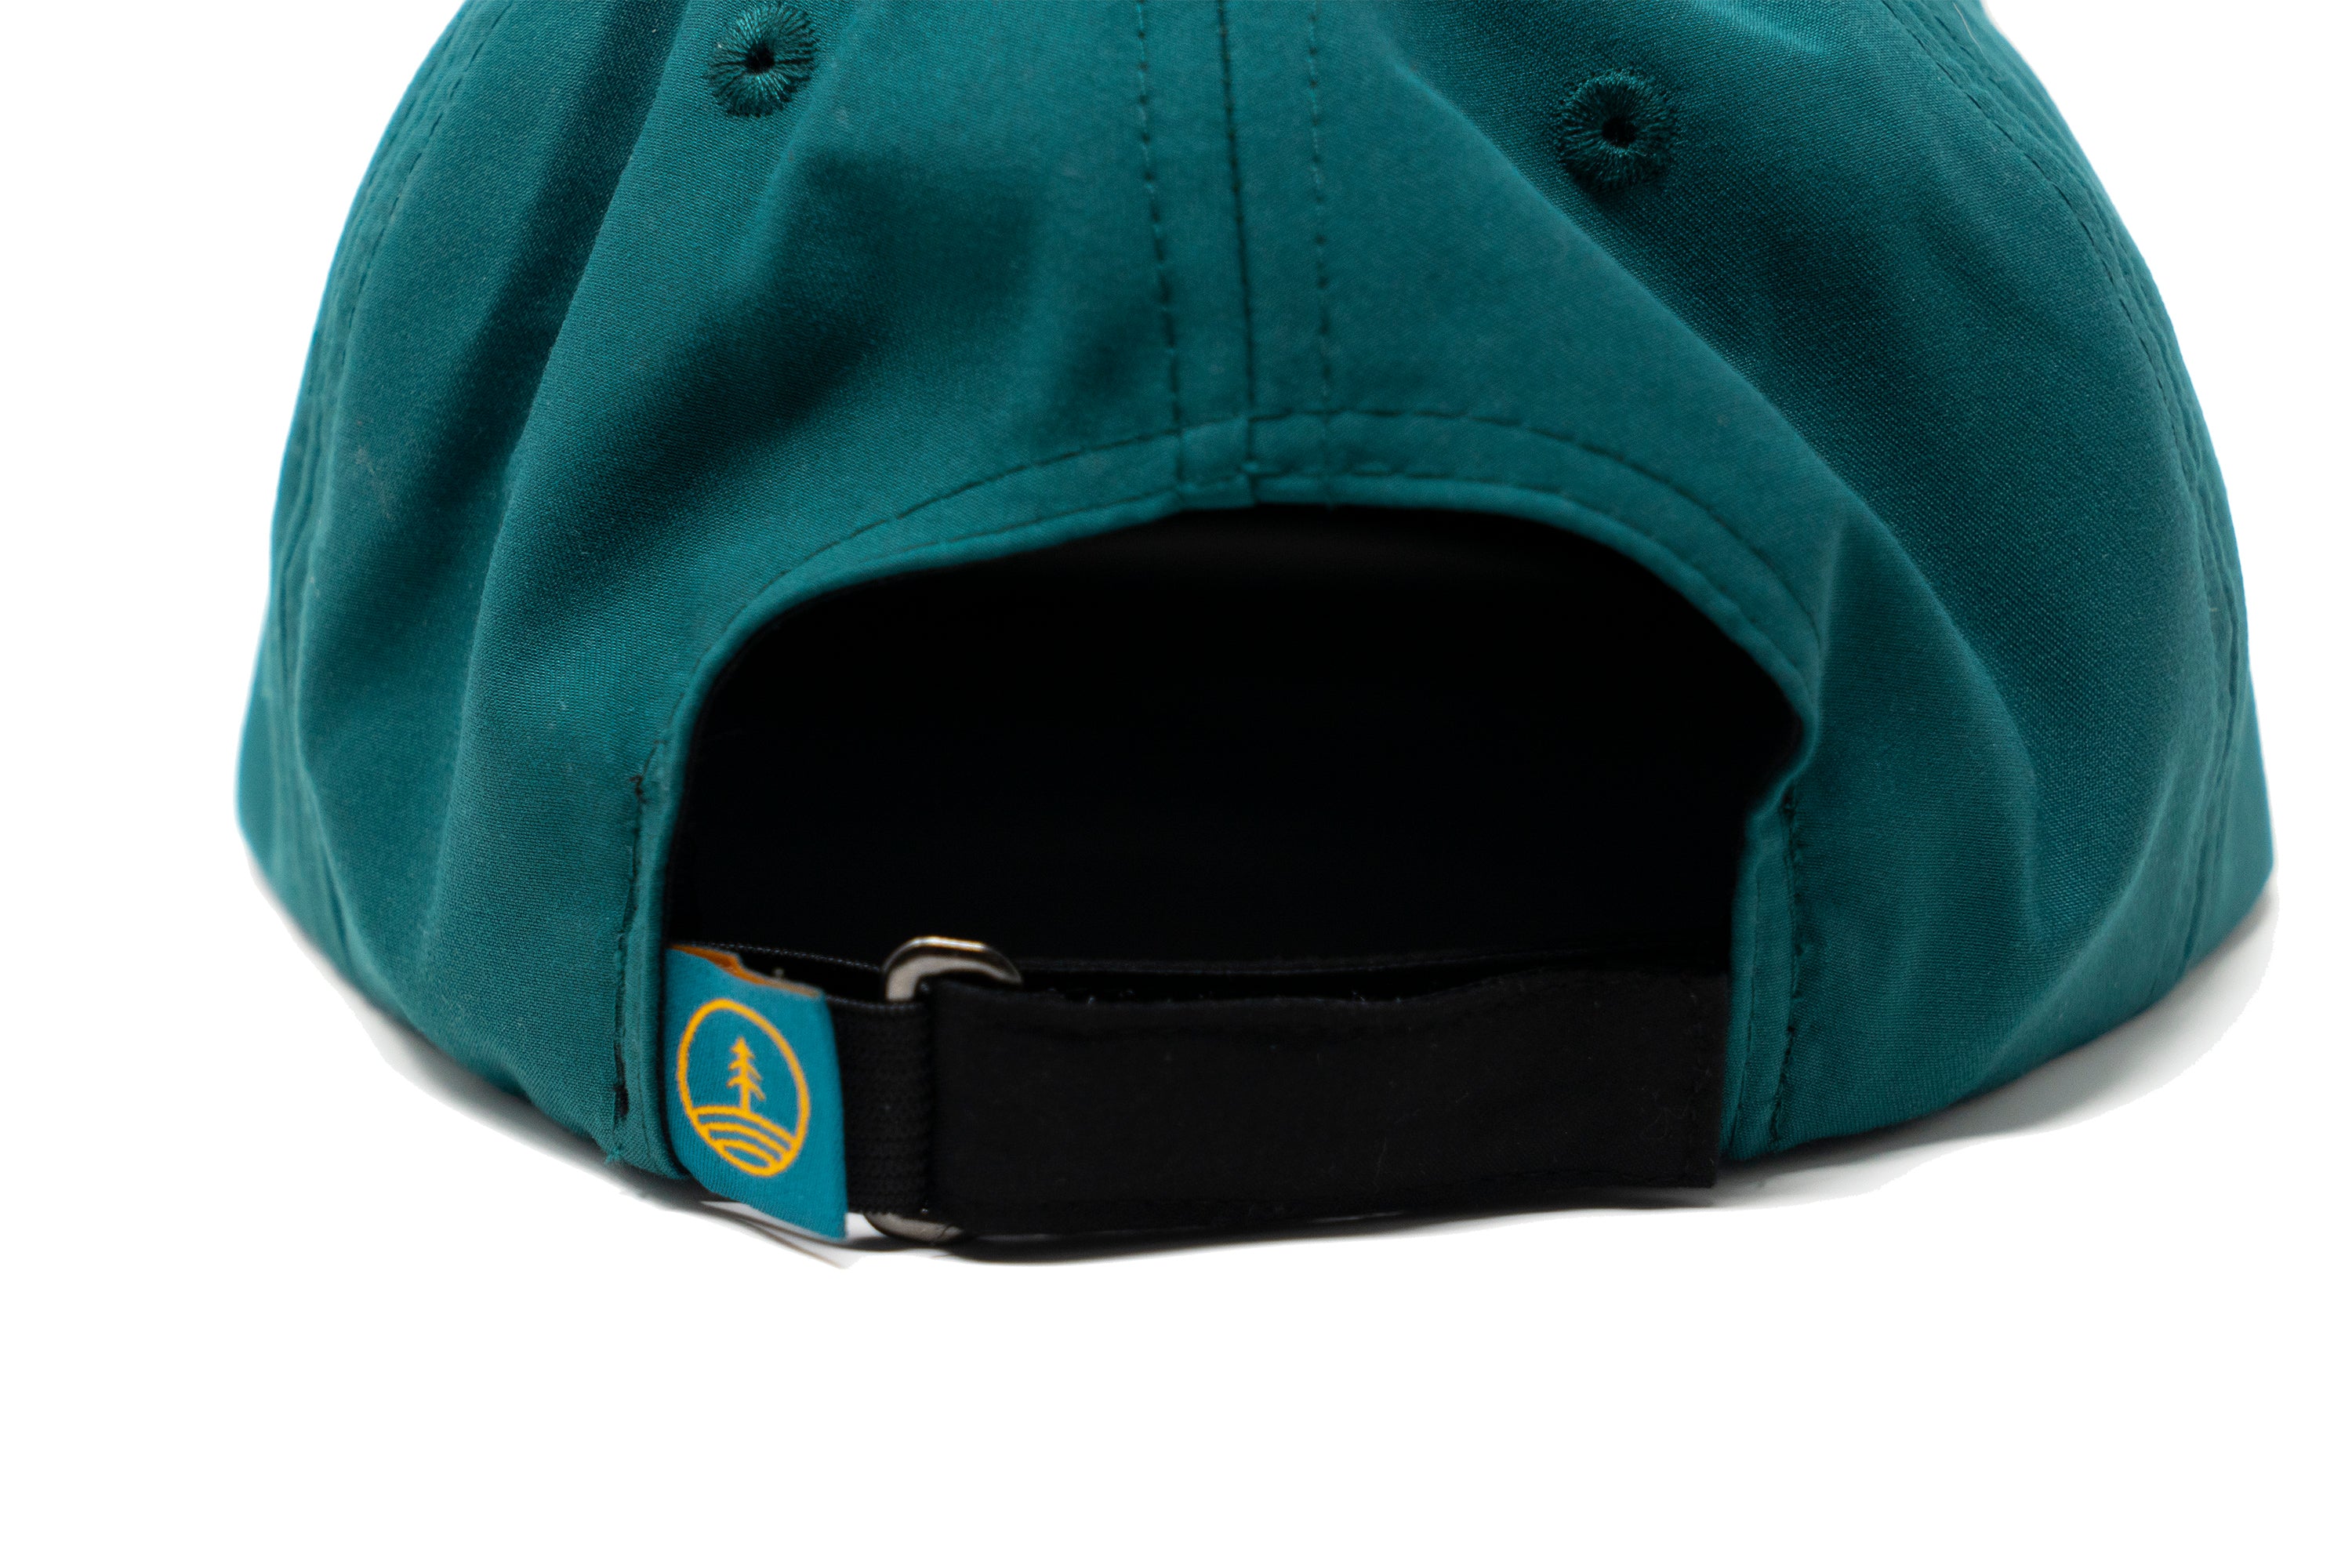 The Pack Hat